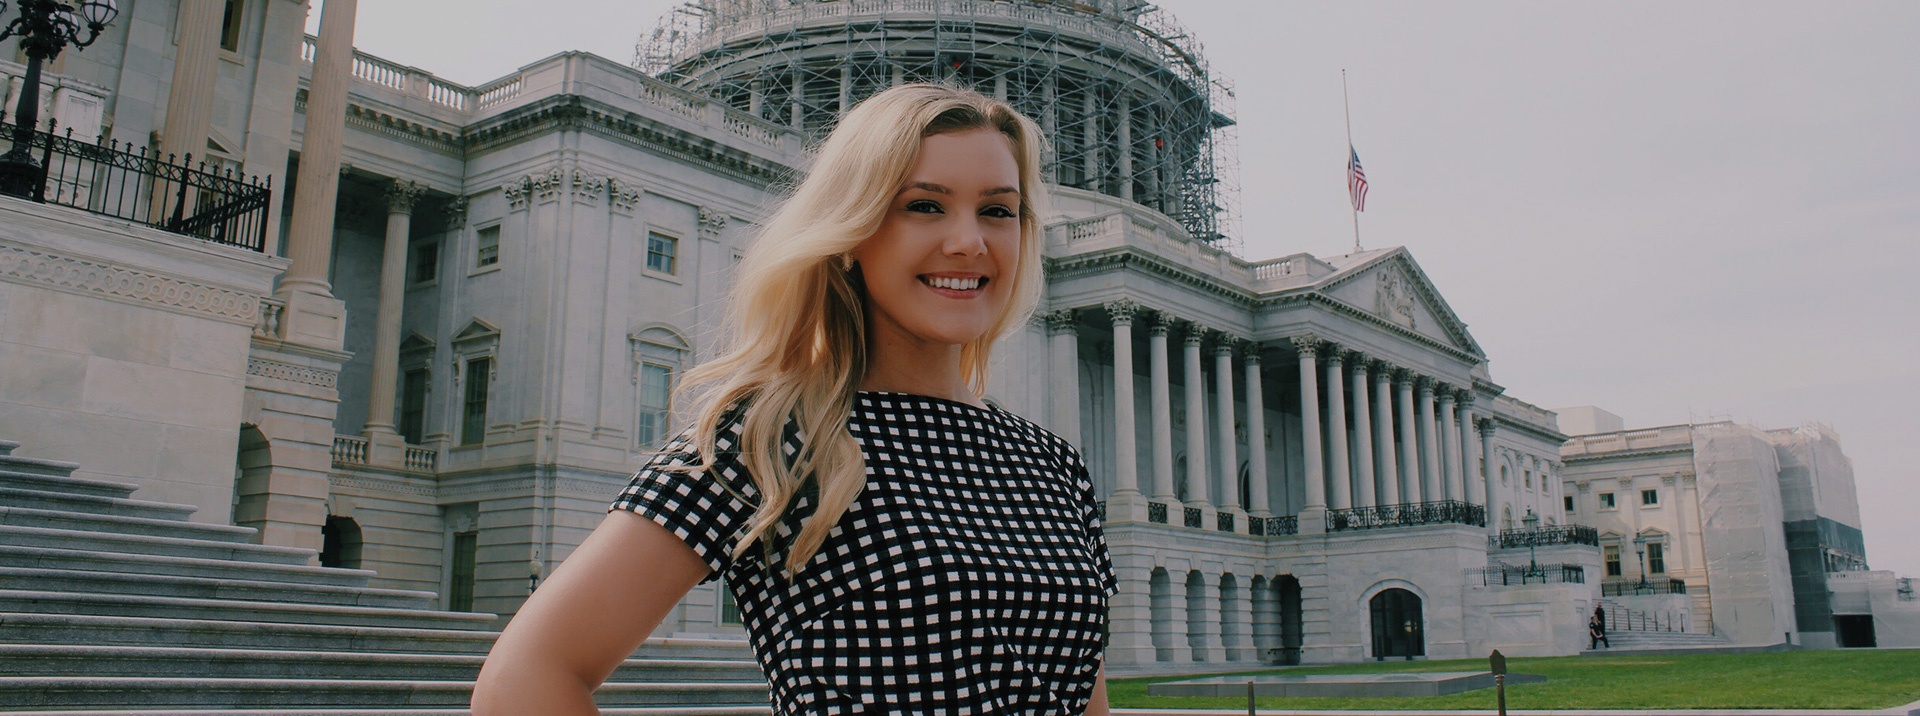 Intern standing in front of the US Capitol building 